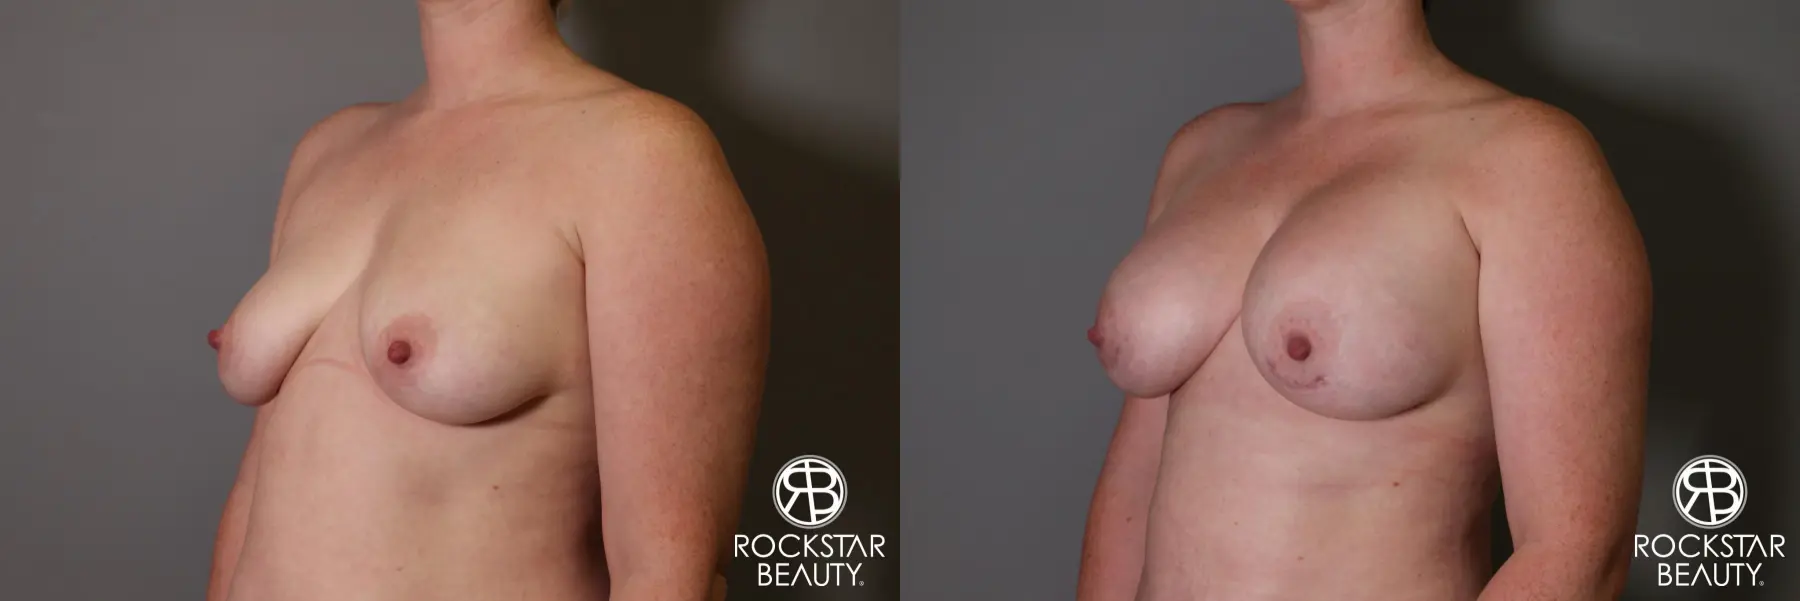 Breast Augmentation: Patient 11 - Before and After 4